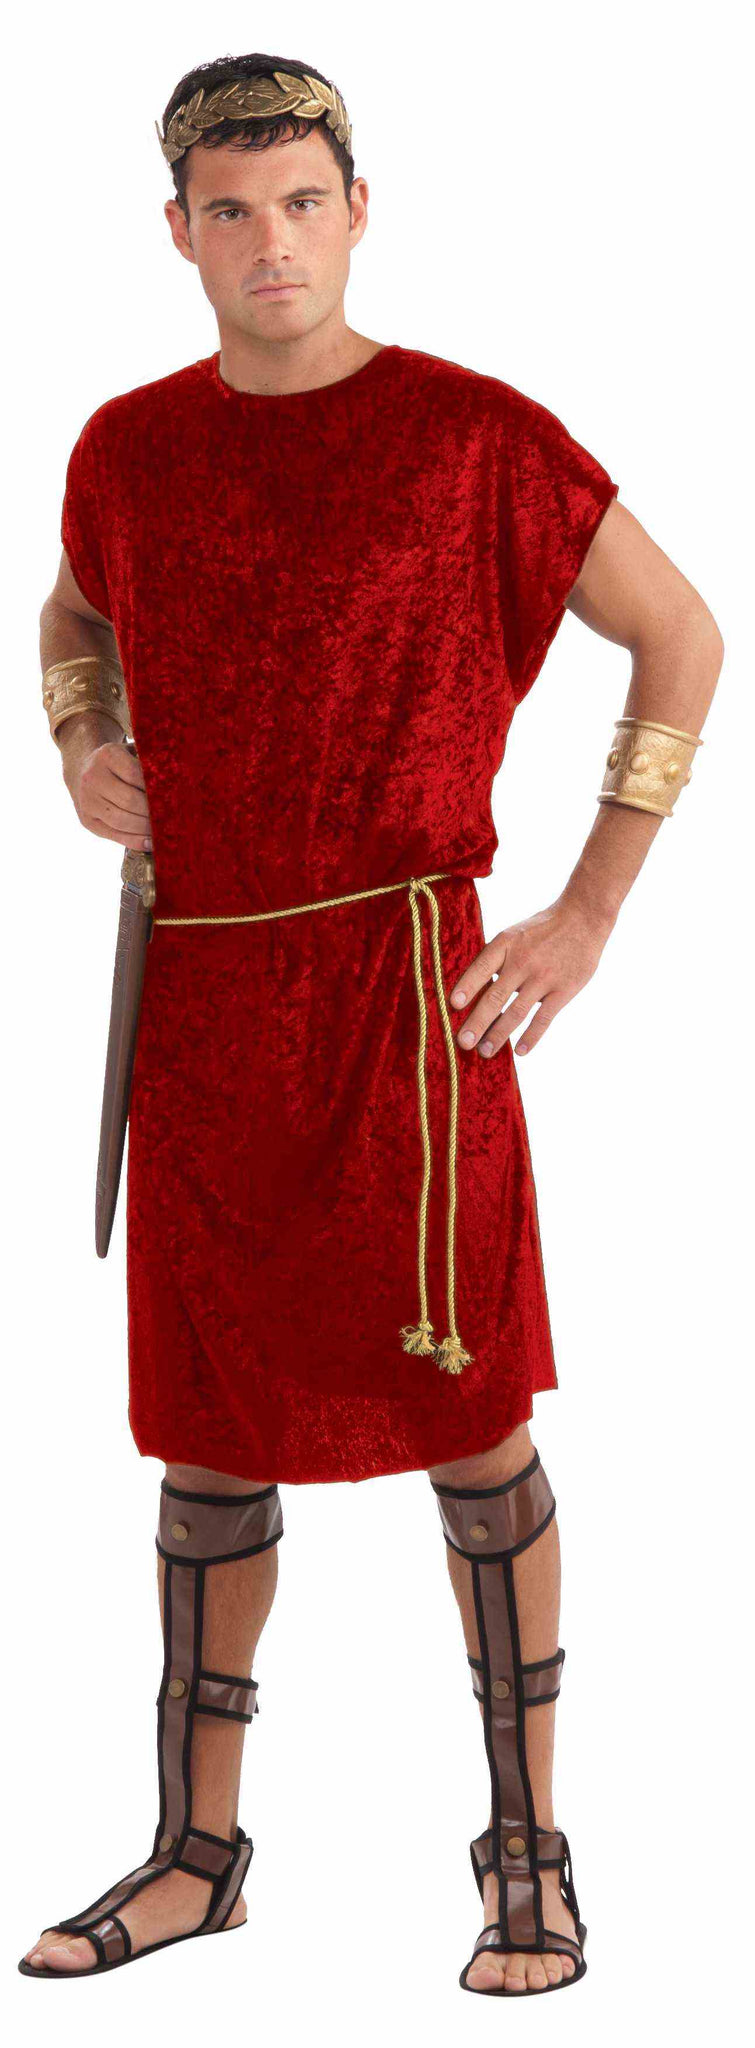 Red tunic with gold rope belt